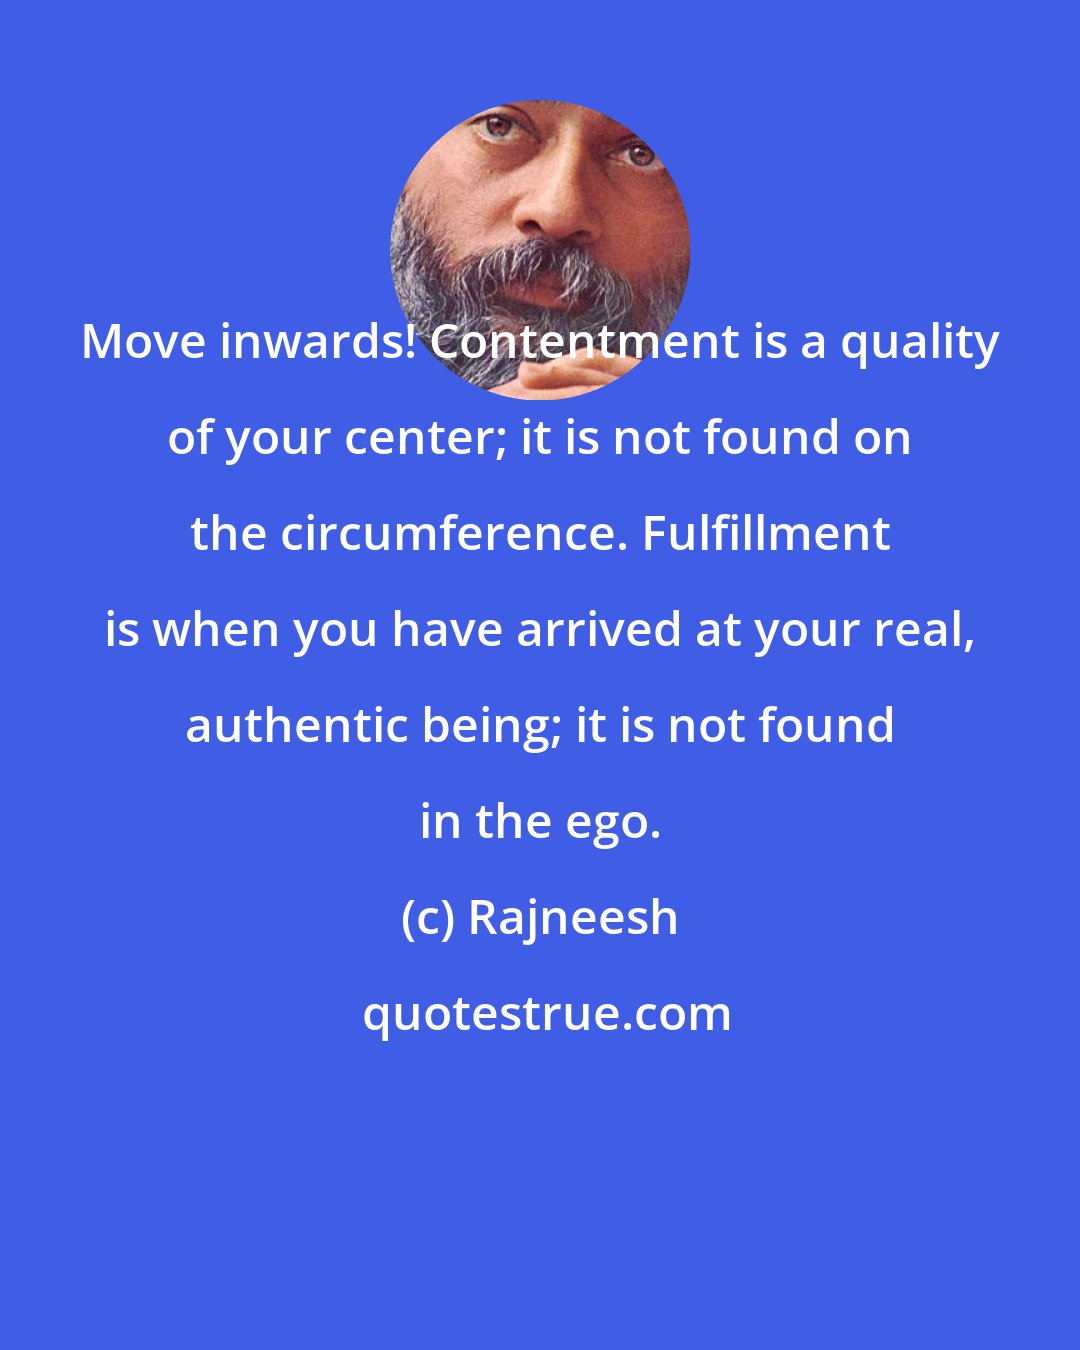 Rajneesh: Move inwards! Contentment is a quality of your center; it is not found on the circumference. Fulfillment is when you have arrived at your real, authentic being; it is not found in the ego.